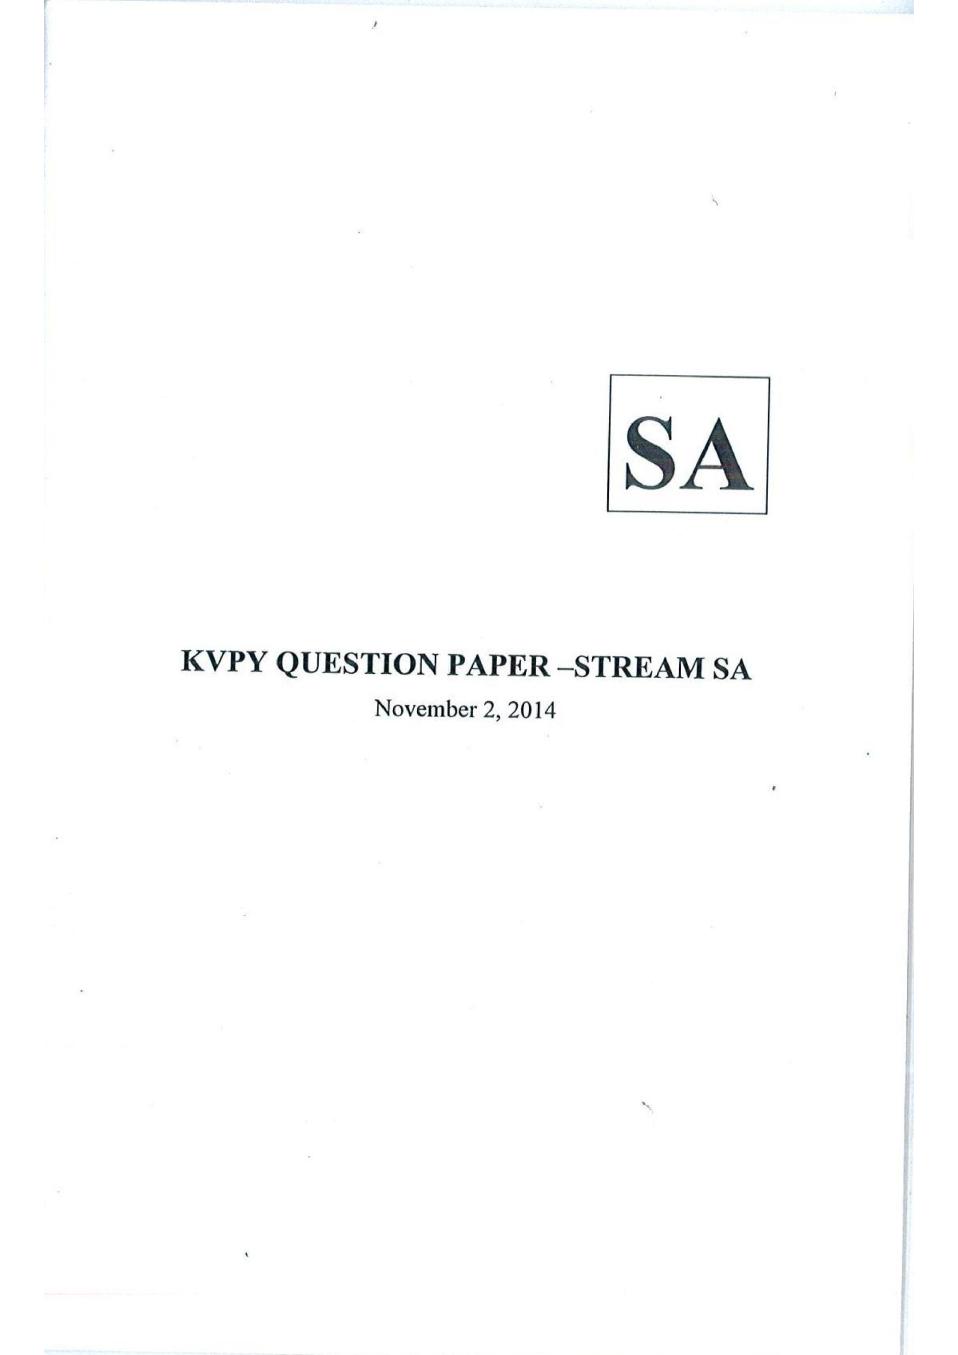 KVPY 2014 Question Paper with Answer Key for SA Stream - Page 1